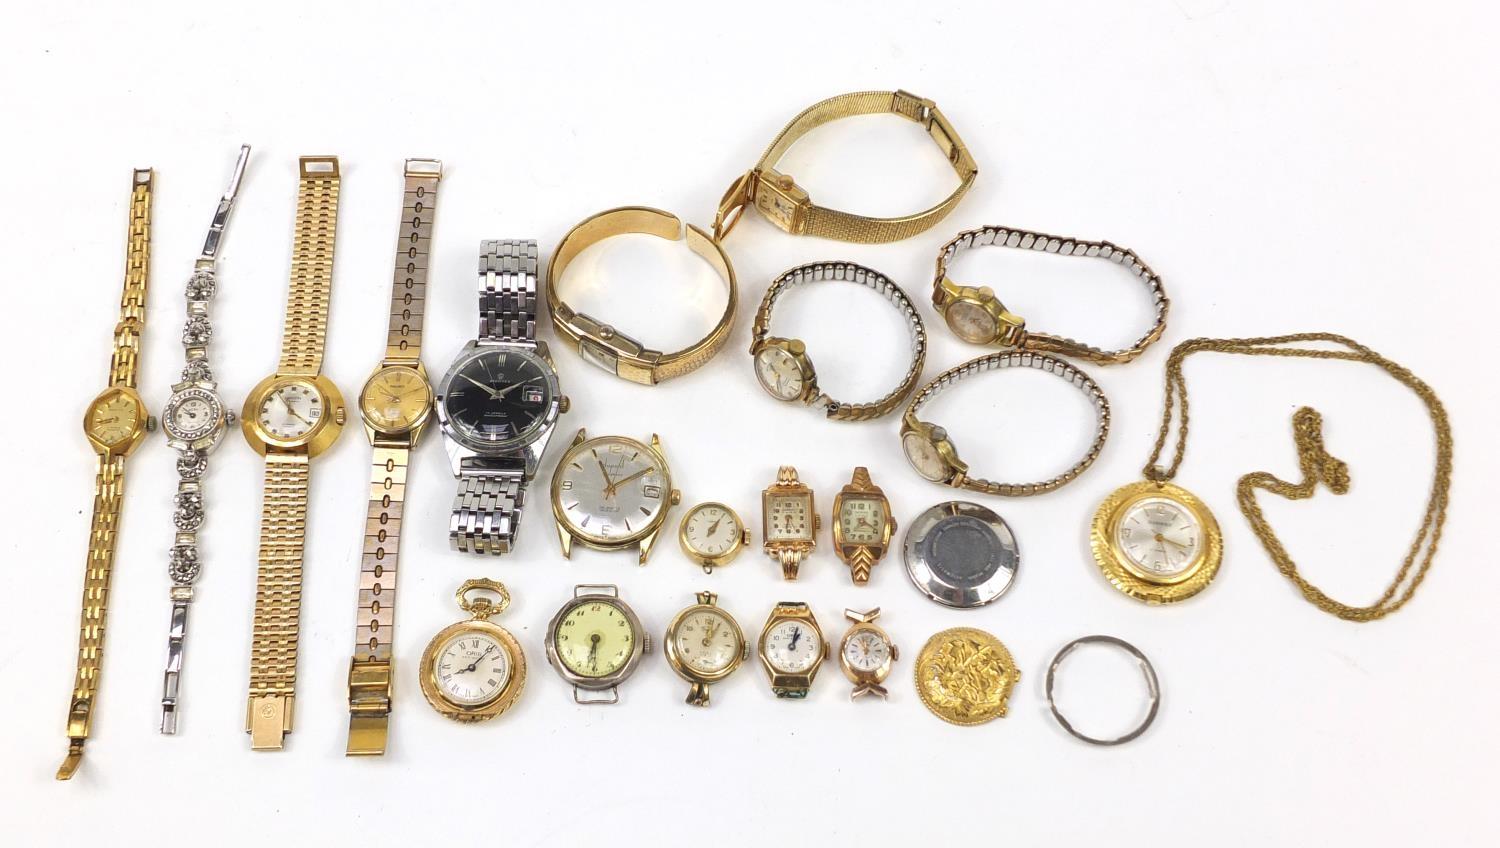 Vintage and later wristwatches including Dupont Automatic, Services, Rotary and Oris